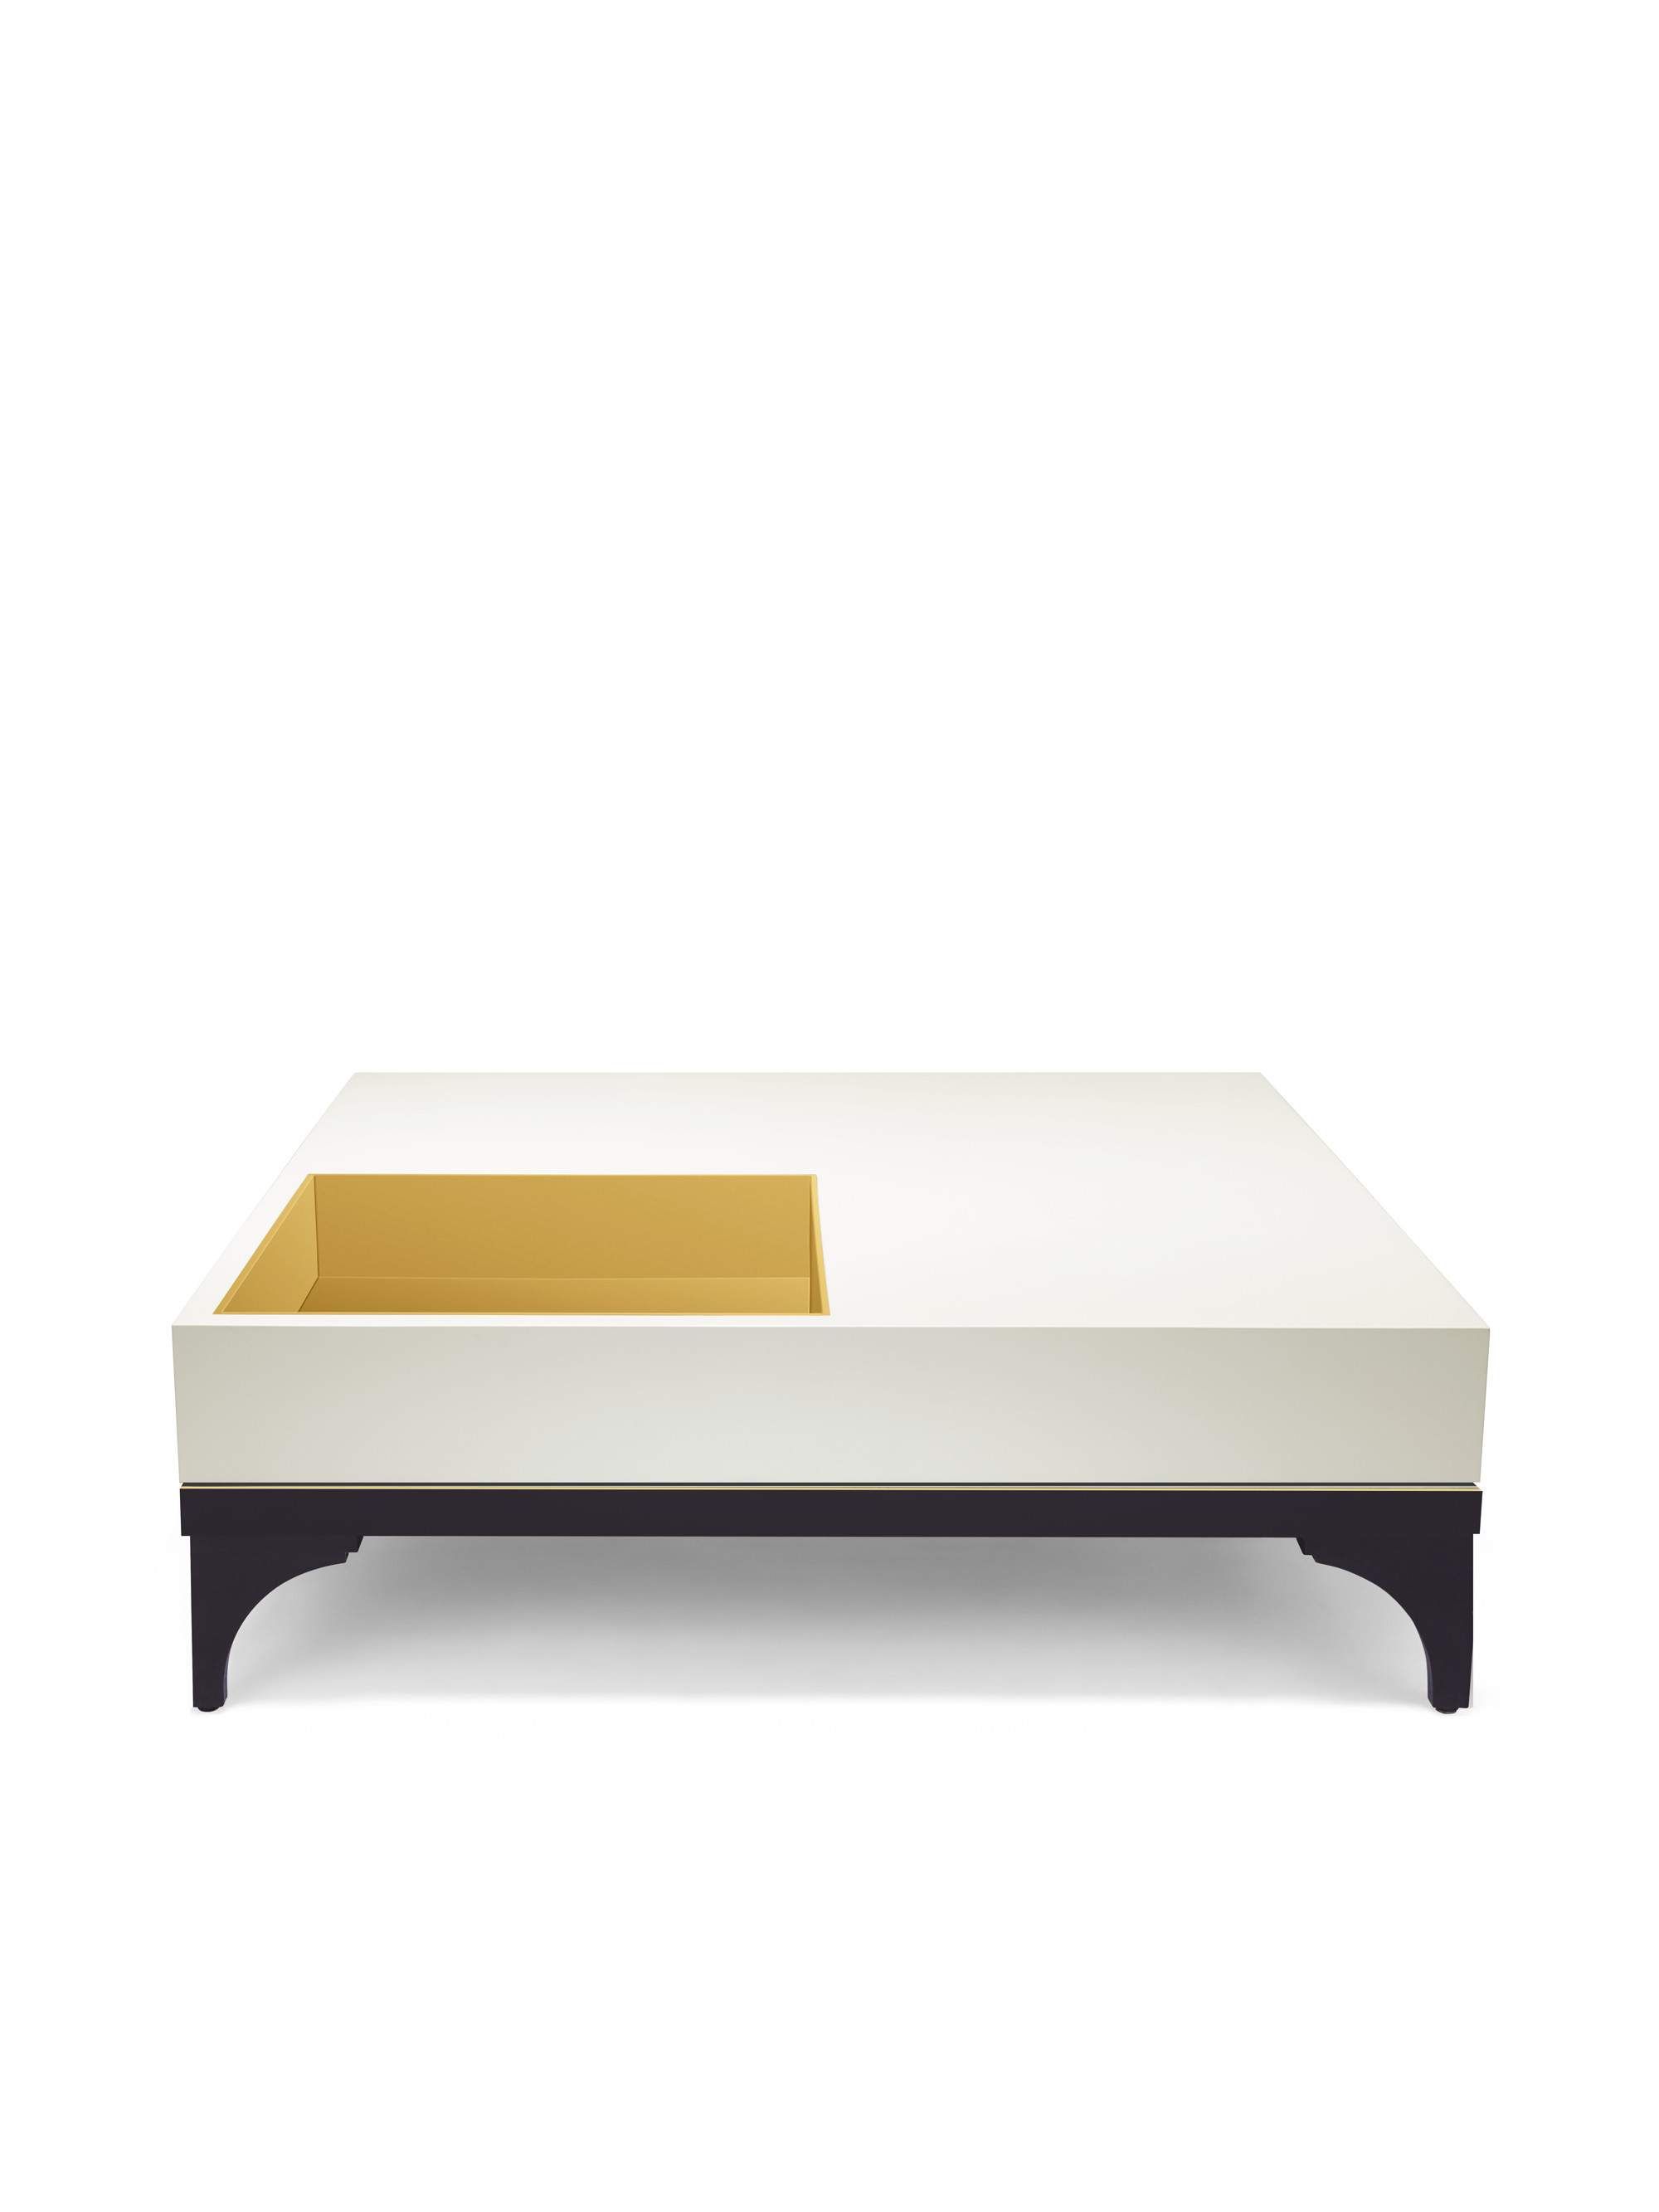 bold coffee table with inset brass tray place home goods accent tables display art books objects curiosities and treasures acquired near far adjustable telephone drawers breakfast